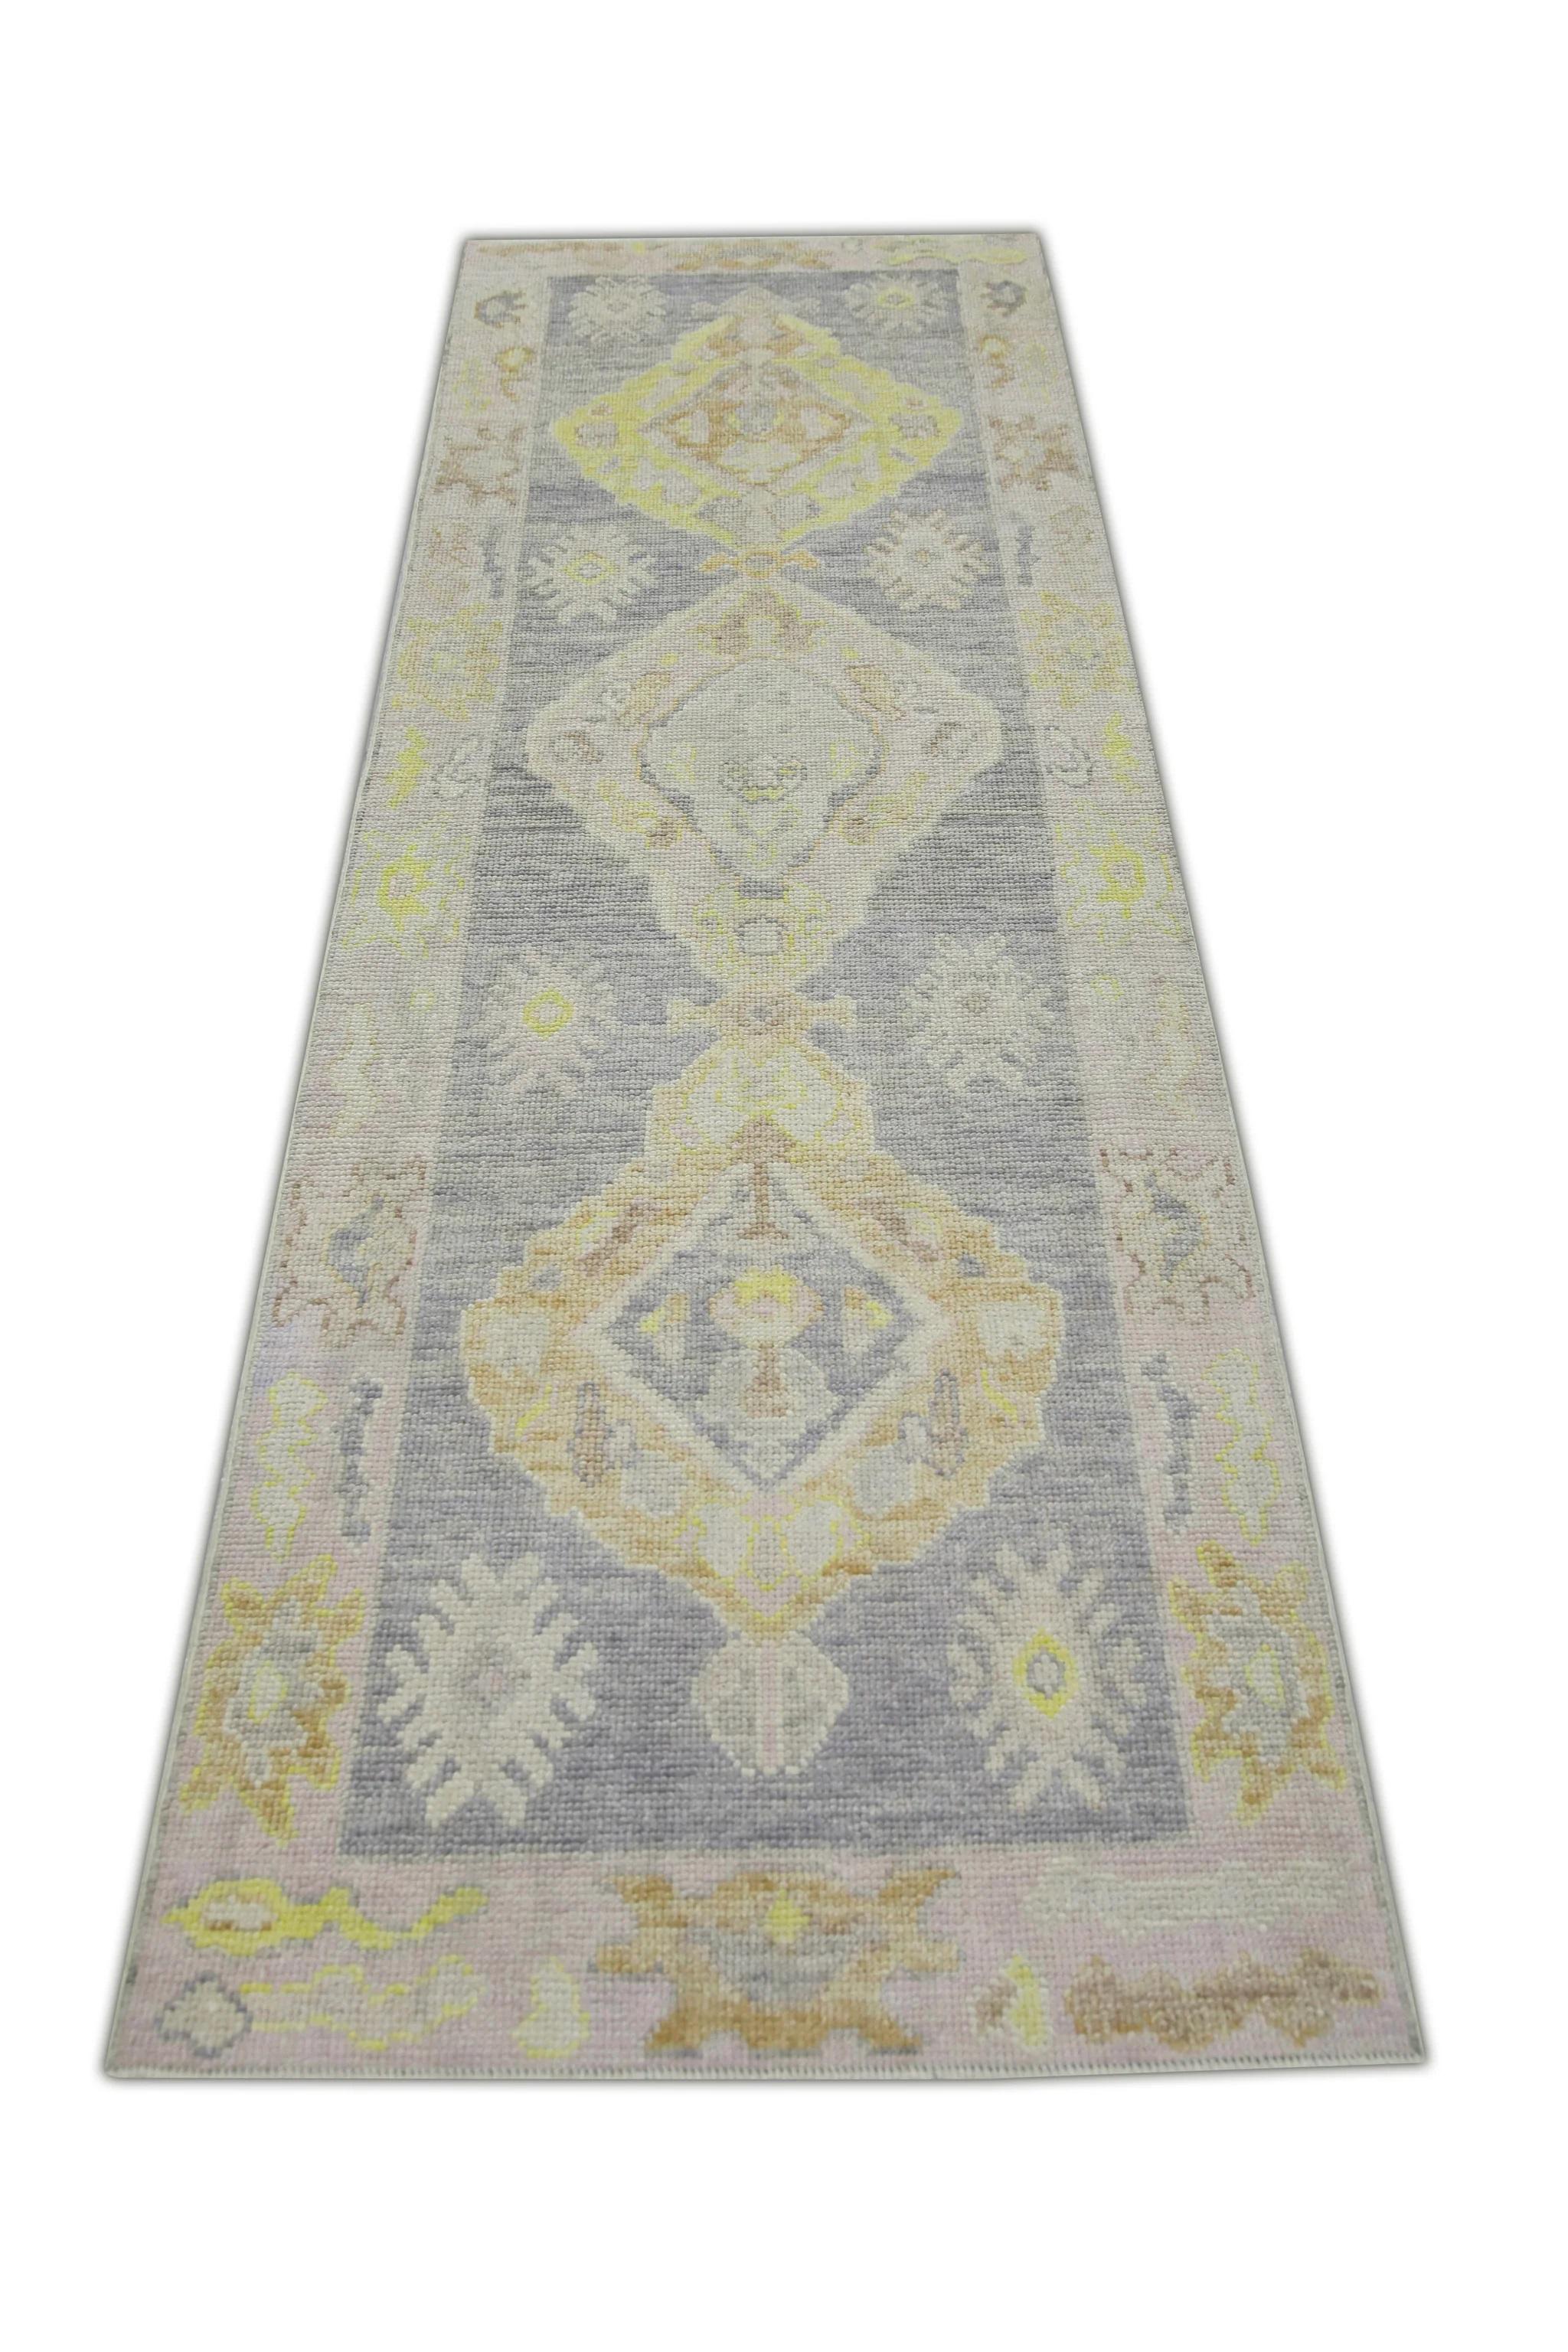 Contemporary Purple and Yellow Floral Handwoven Wool Turkish Oushak Rug 2'9